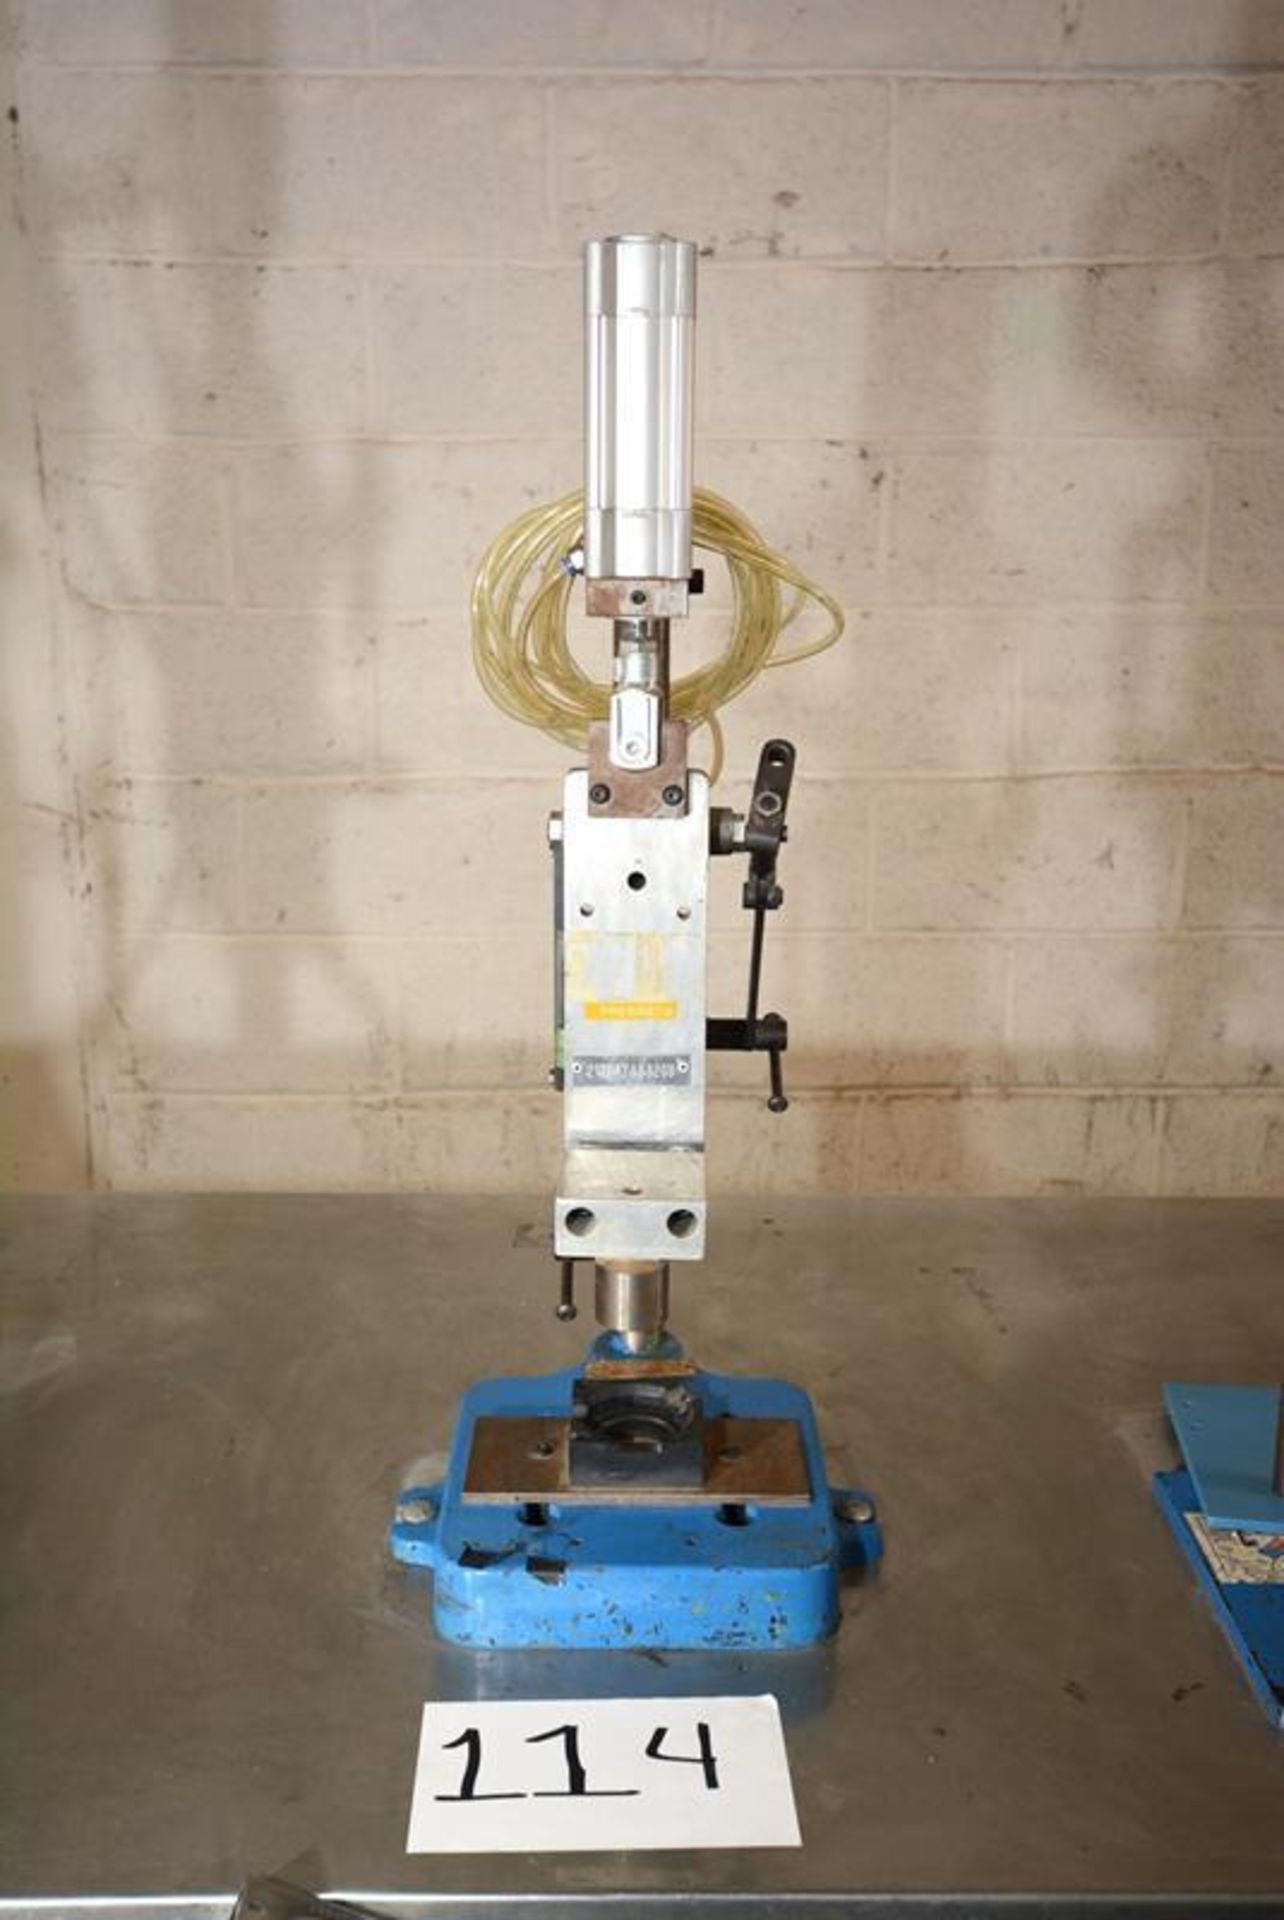 Workstation with two press. Brand: N/A. Model: N/A. Year: N/A. Serial Number: N/A. Possible Uses: - Image 6 of 15